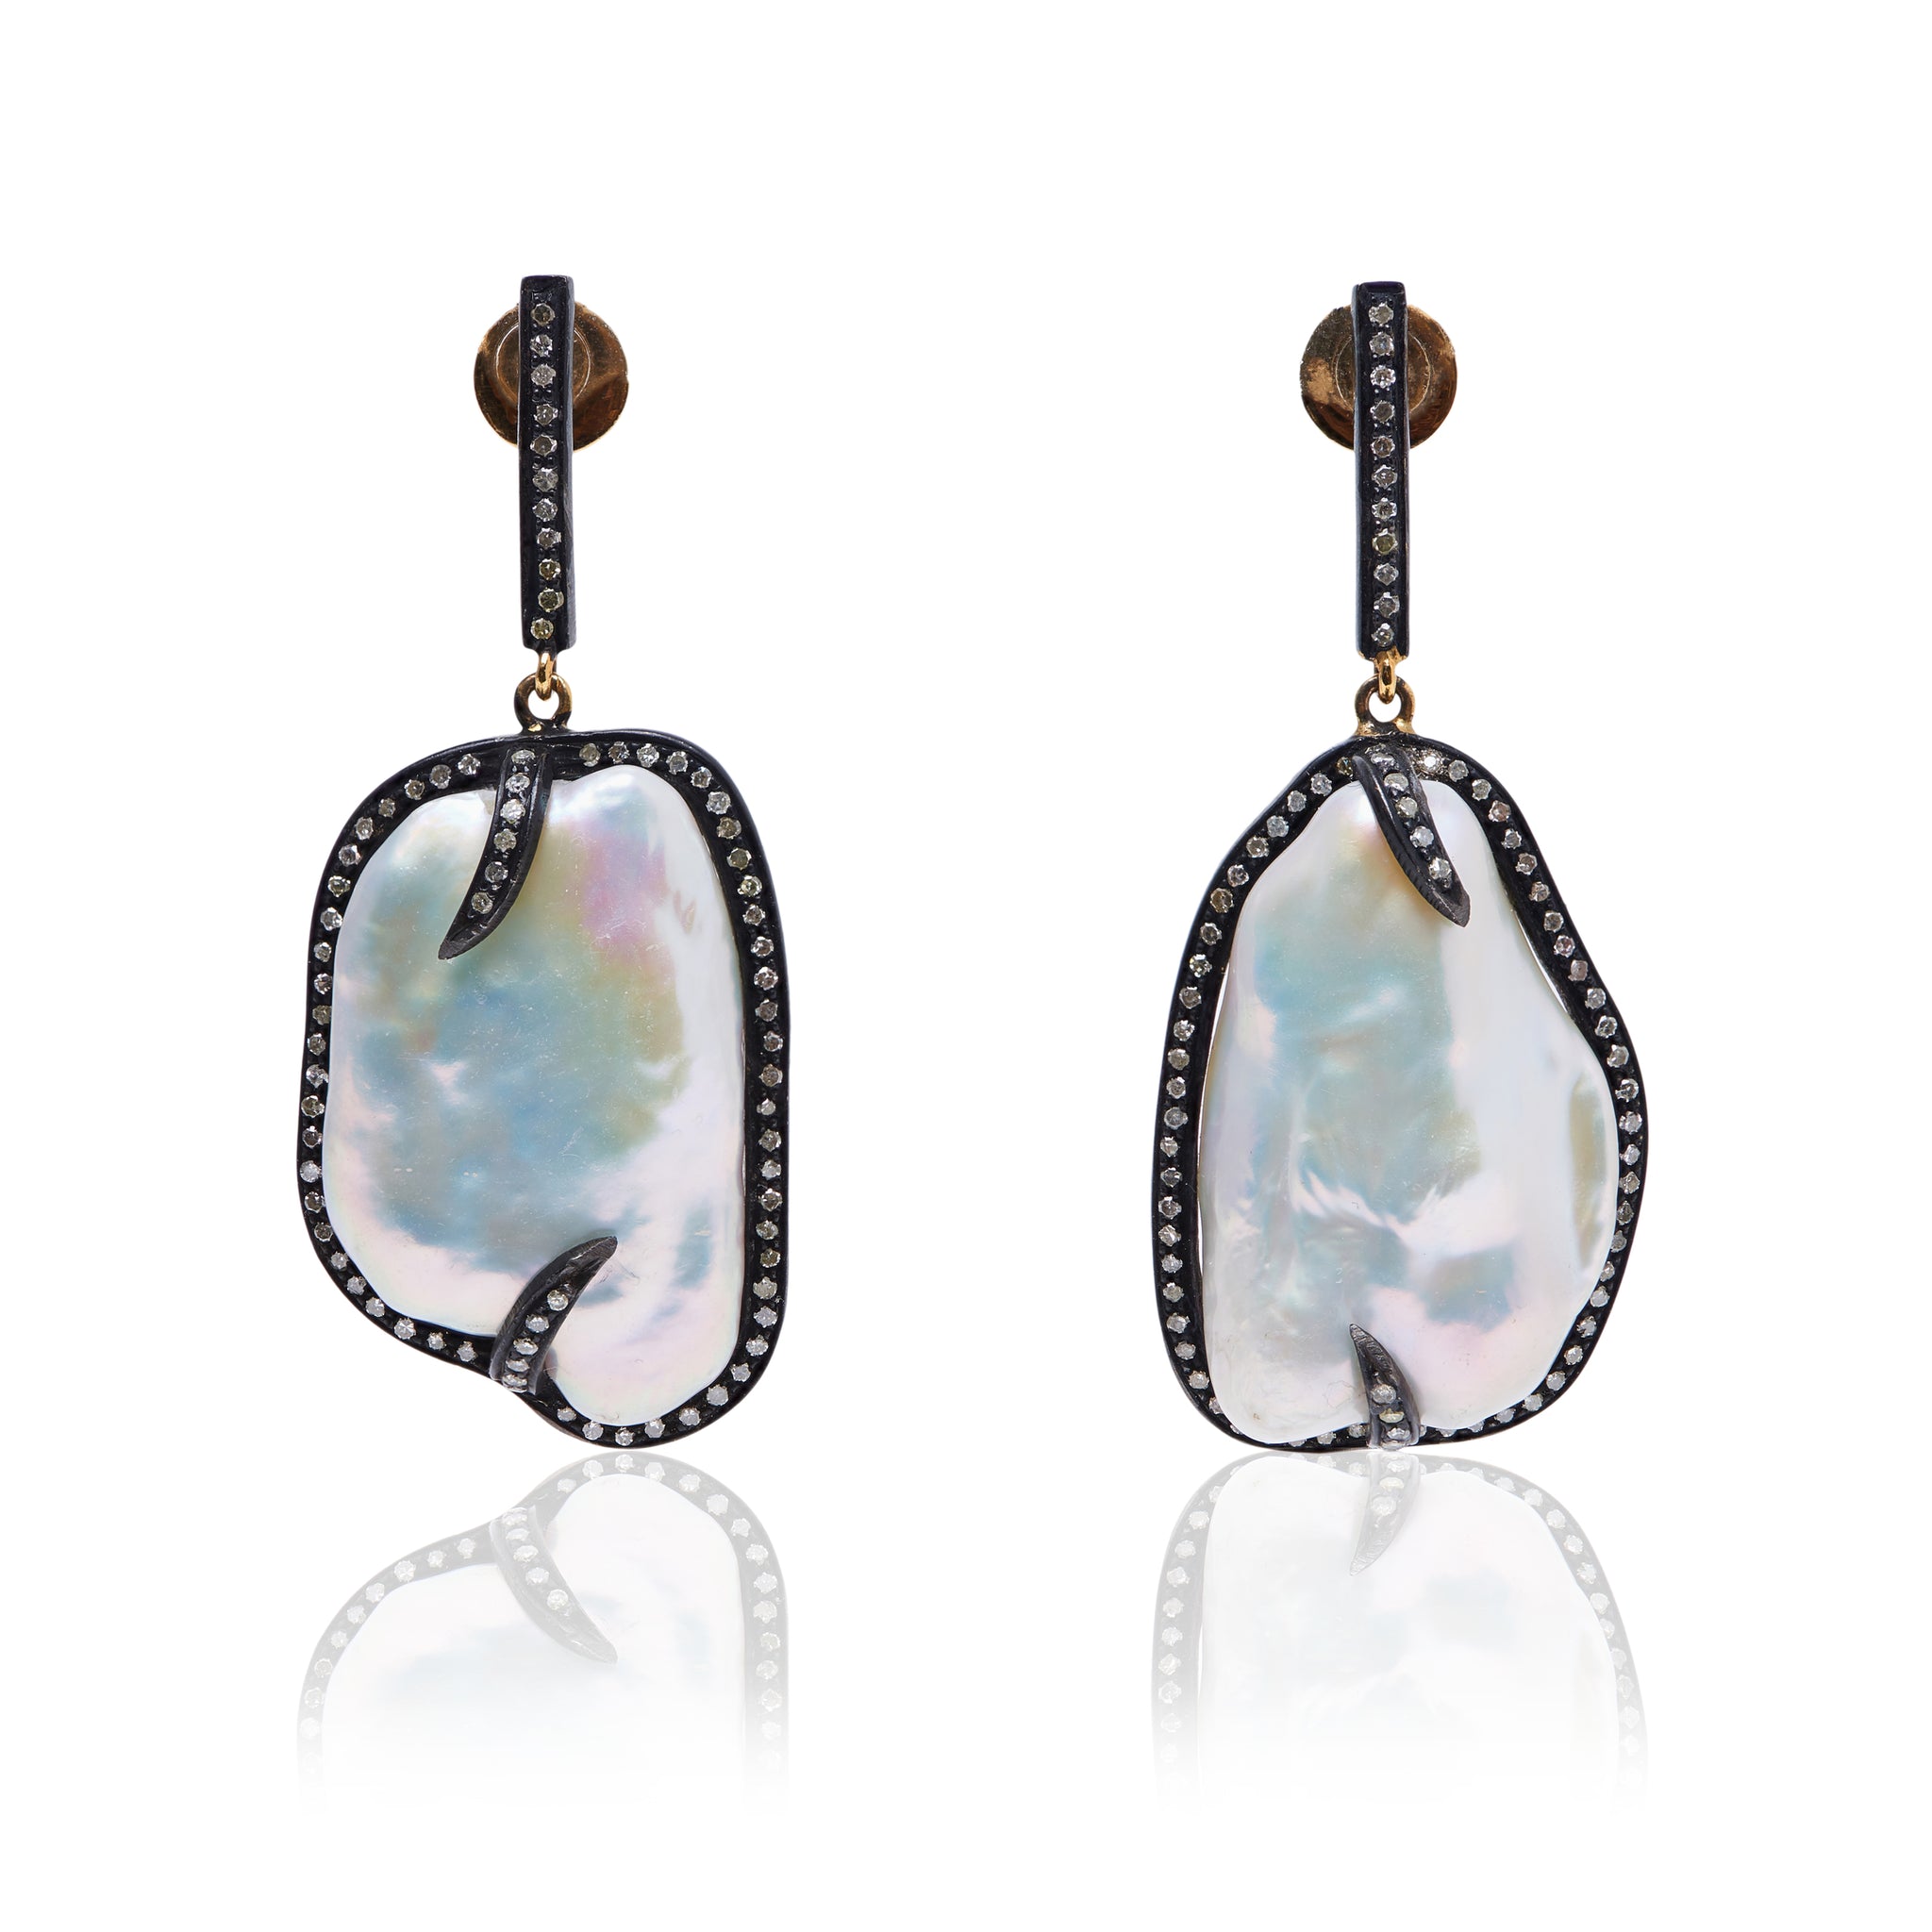 Diamond and Baroque Pearl earrings in oxidised sterling silver